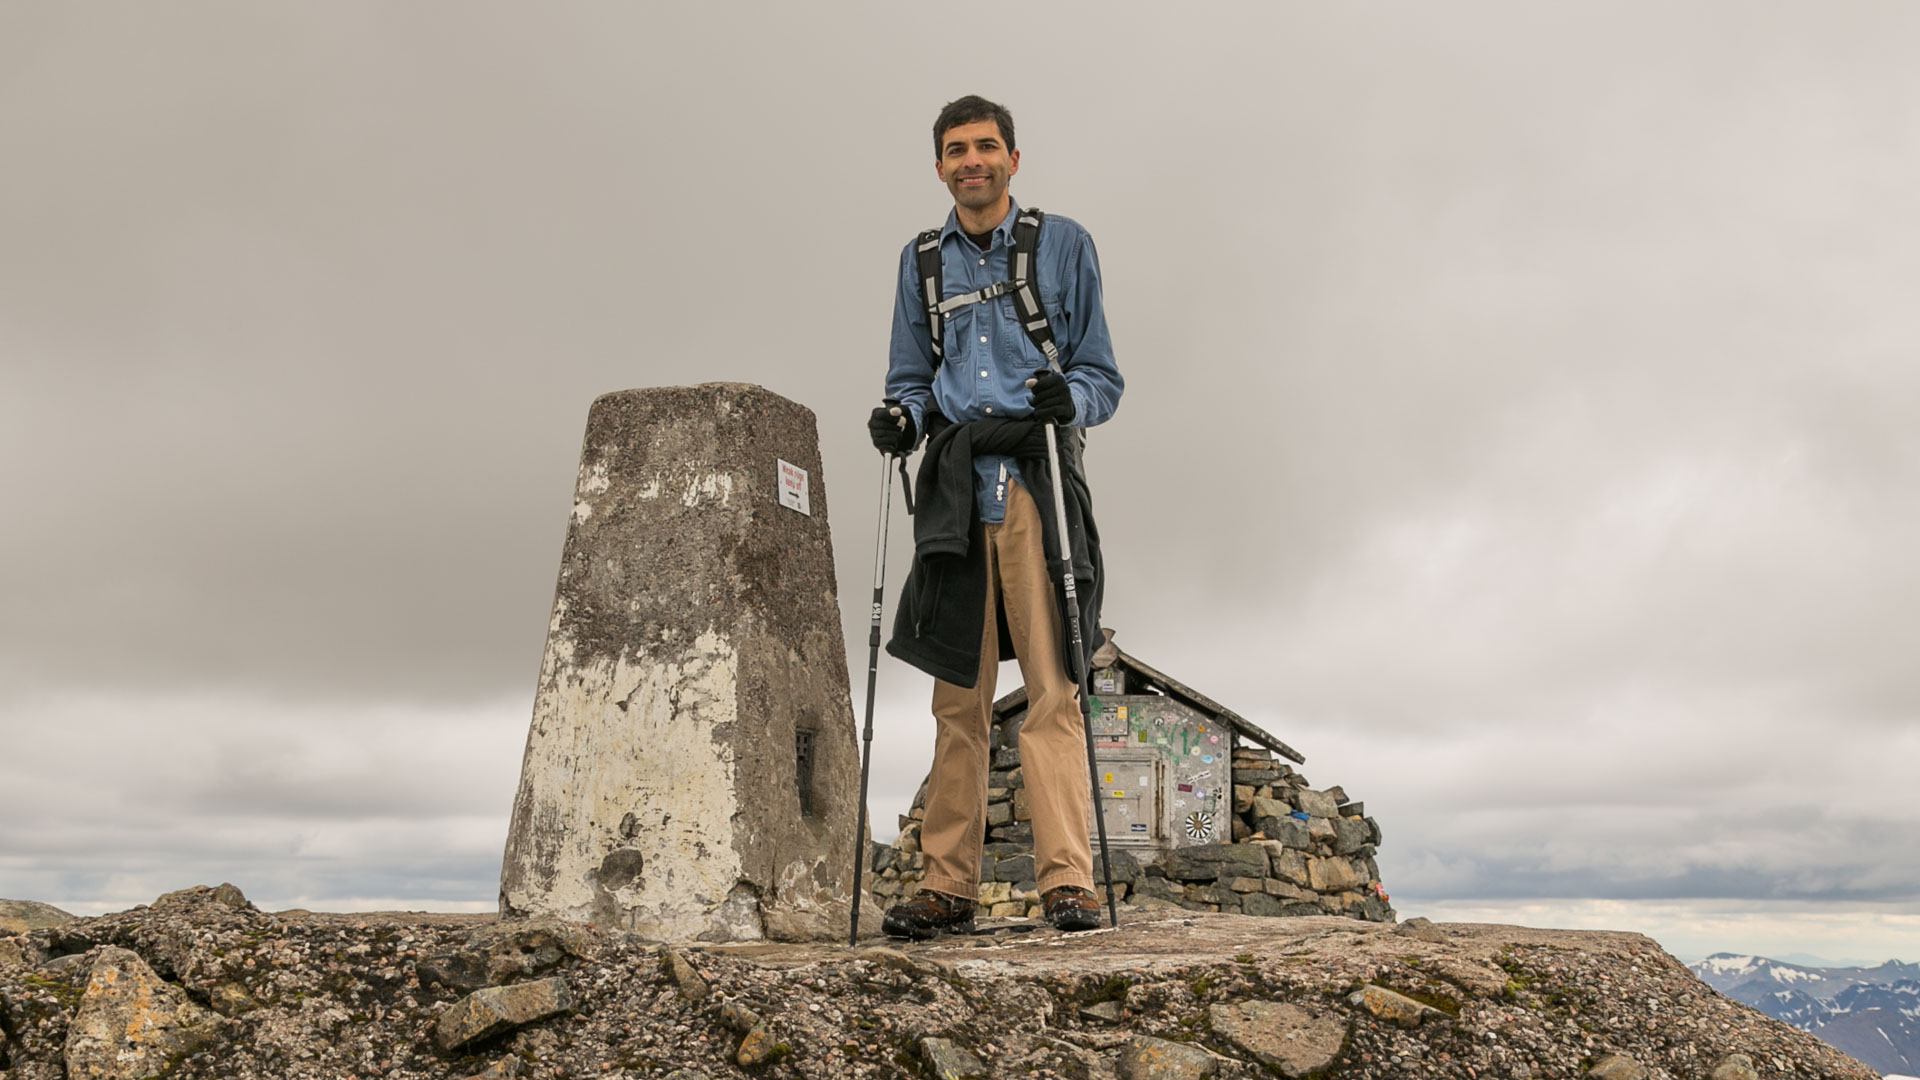 Me with trekking poles, standing next to a cairn on top a rocky platform, with a metal shack in the background and a gray sky behind.